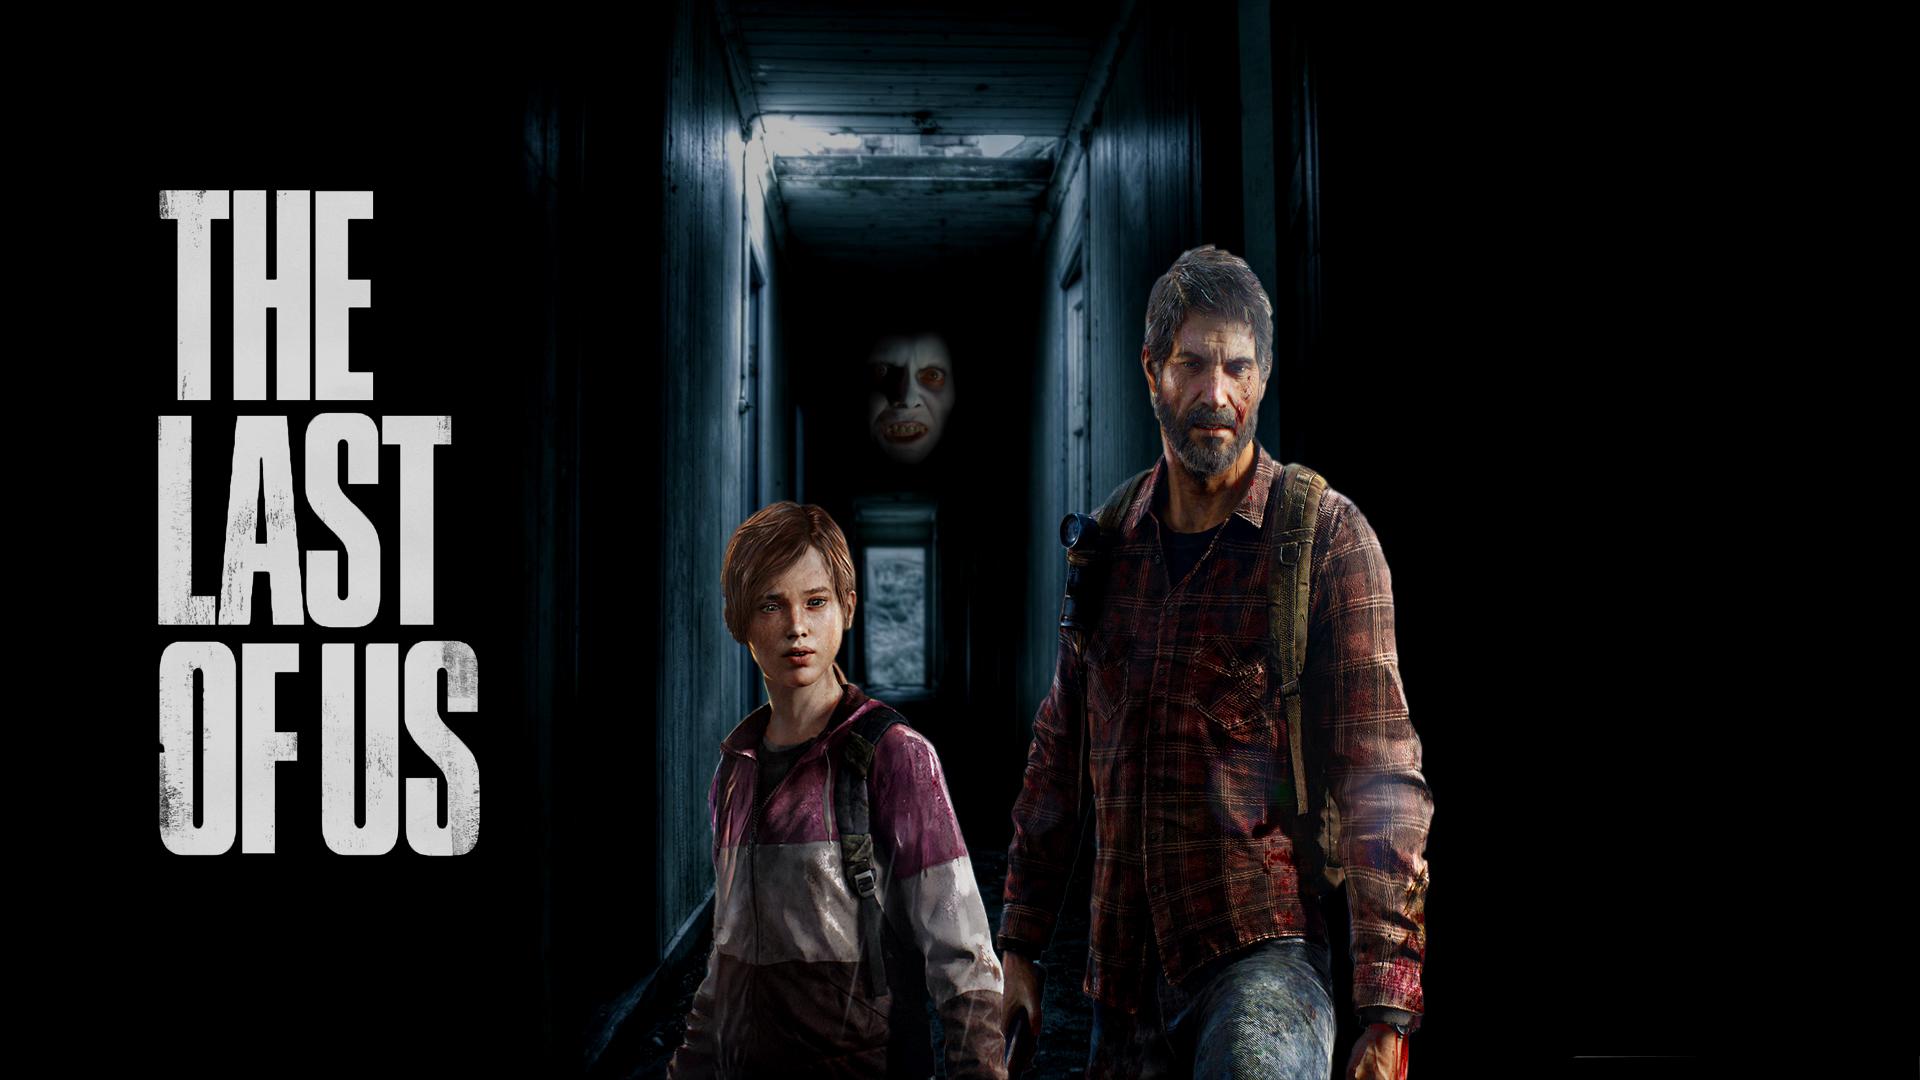 The last of us   119341   High Quality and Resolution Wallpapers on